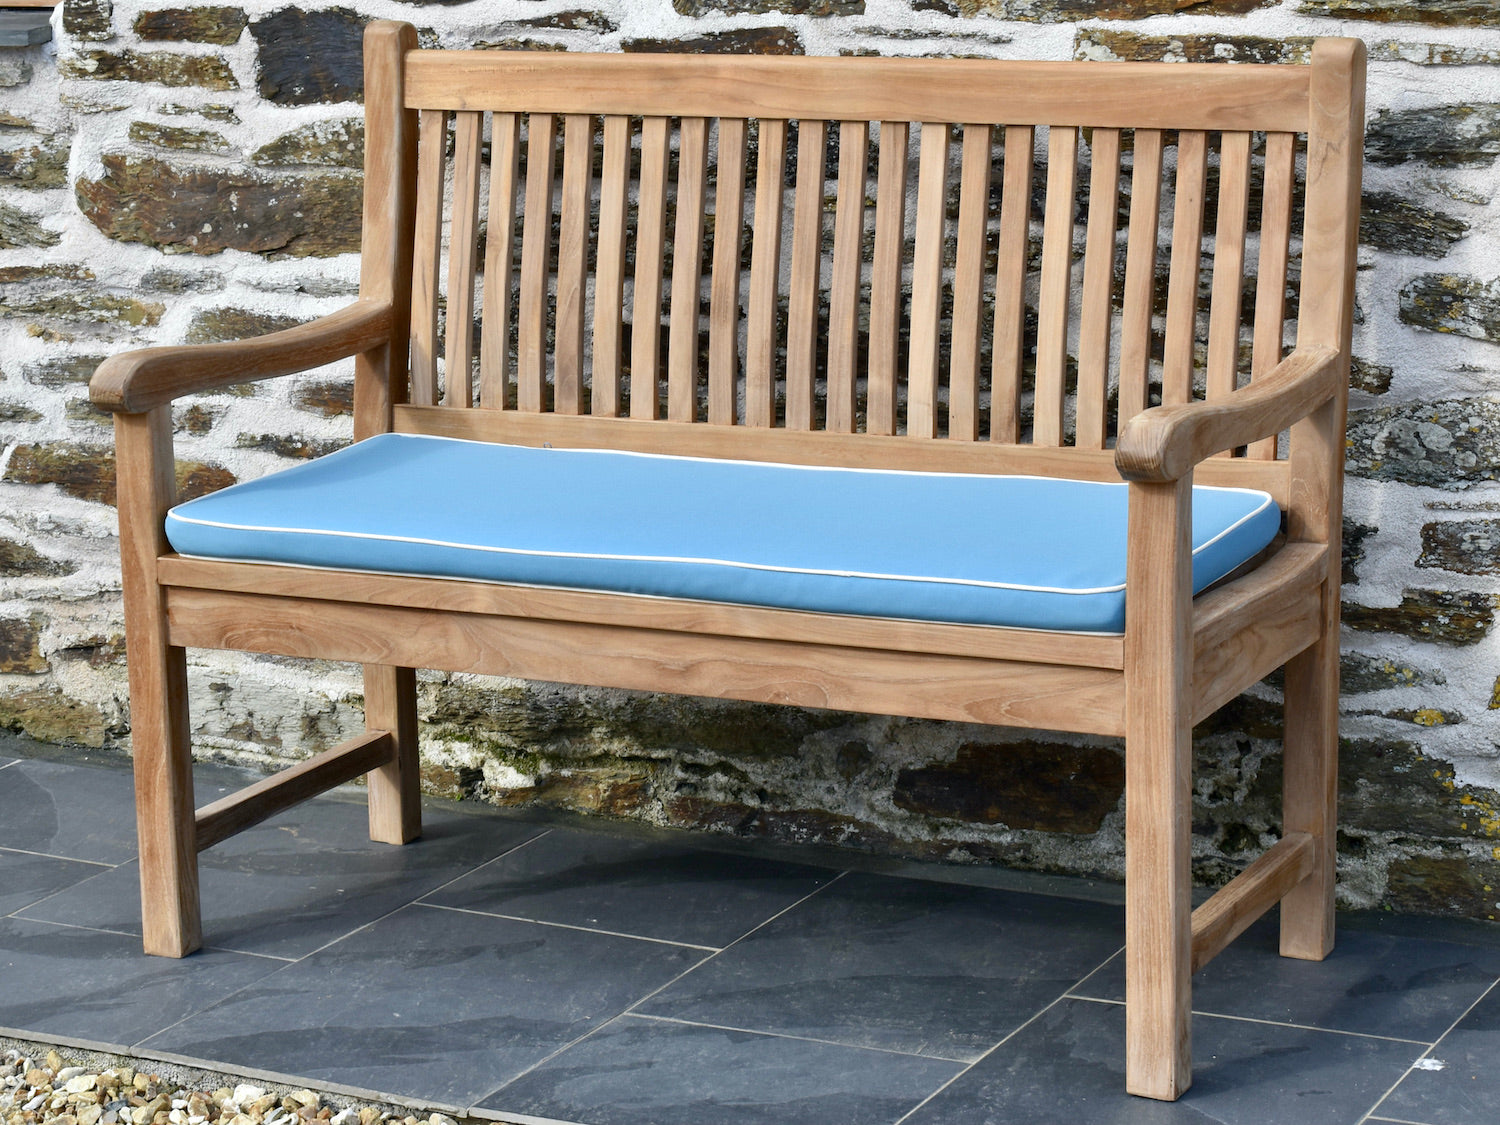 Luxury light blue 2 seater / 120cm outdoor garden bench cushion with contrast white piping